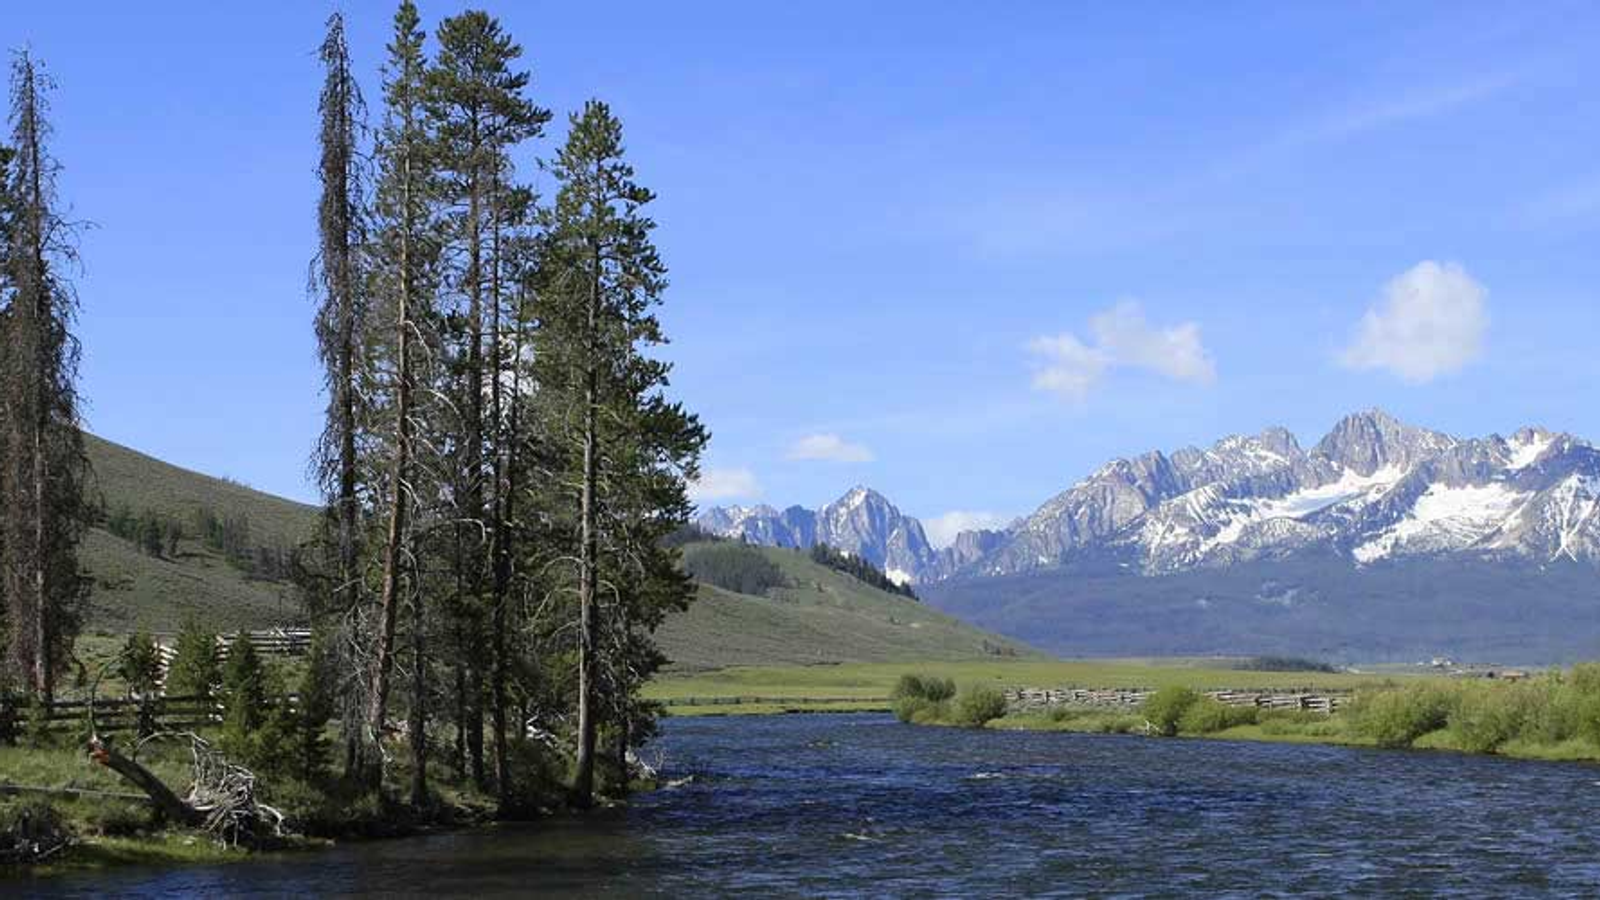 The salmon river with the sawtooth mountains in the background